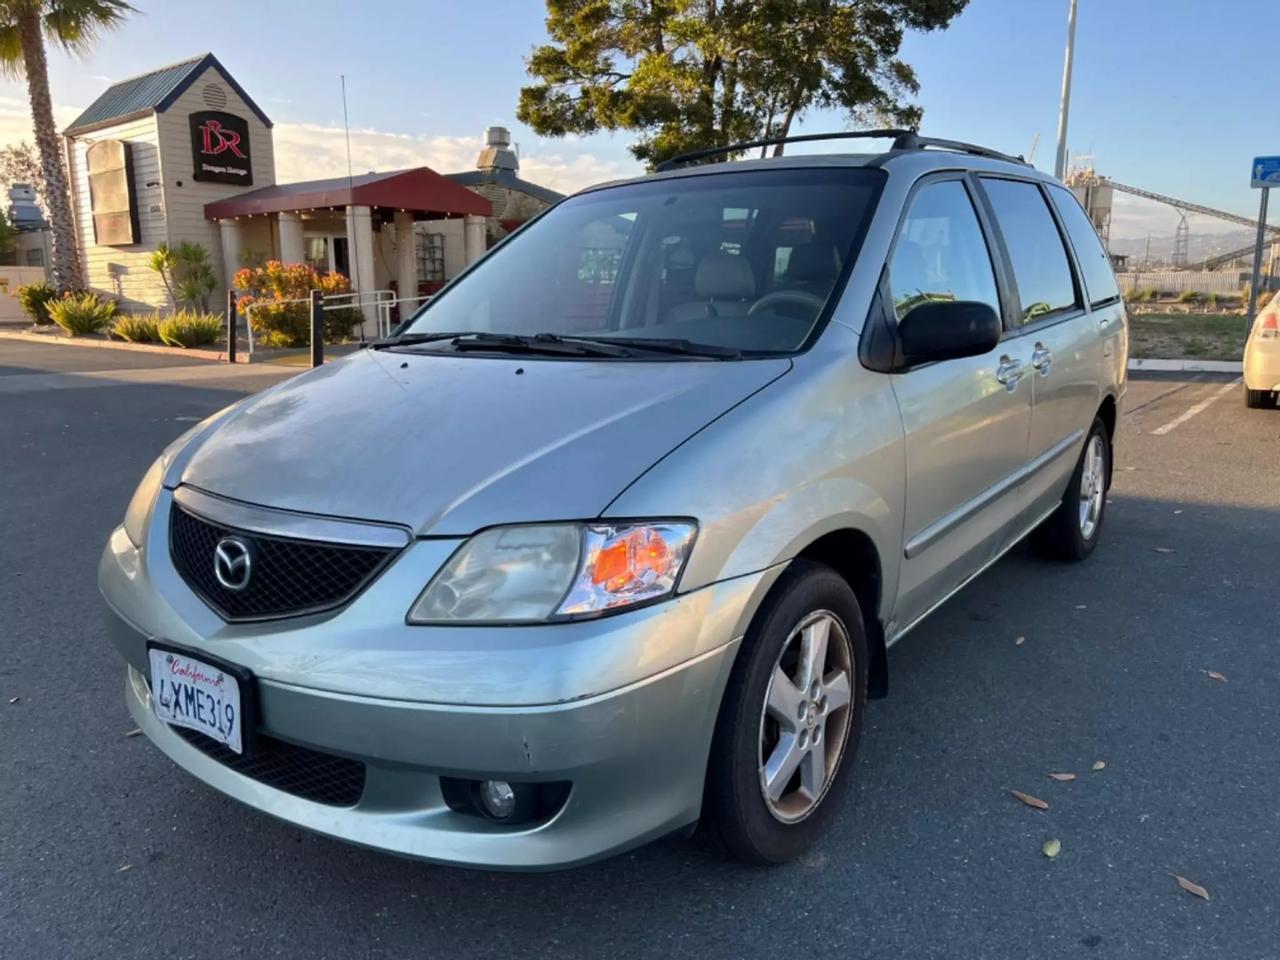 Used 2002 Mazda MPV's nationwide for sale - MotorCloud